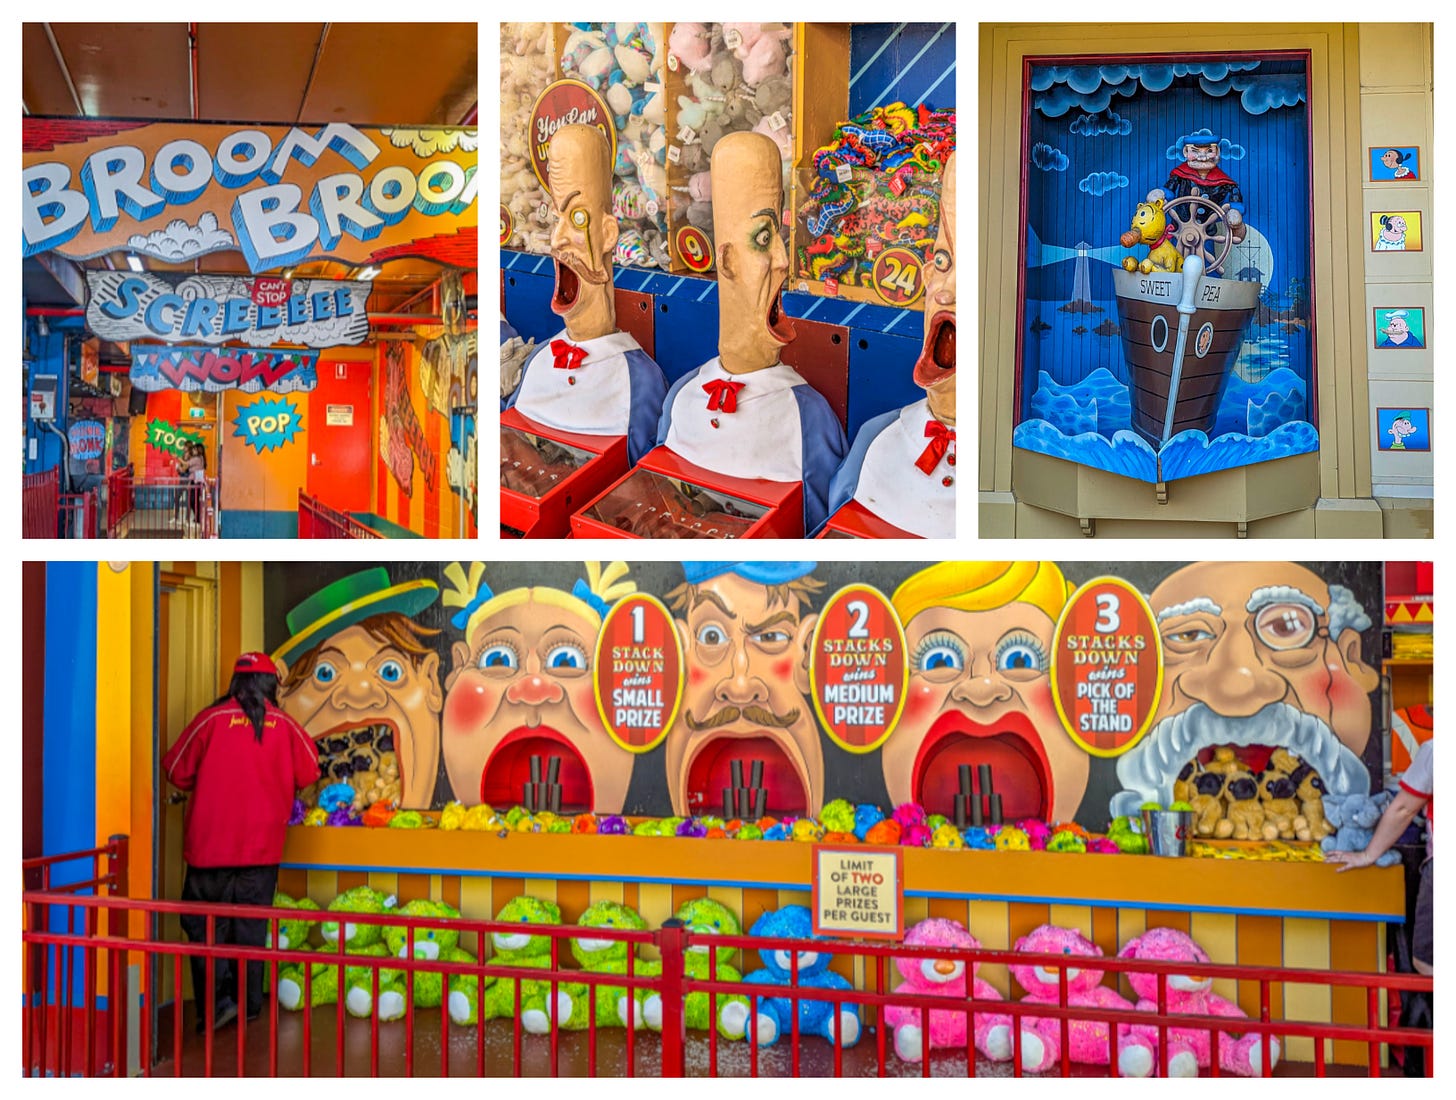 Collage of retro images including Popeye, as well as arcade games like the beanbag toss, and water pistol balloon race. 